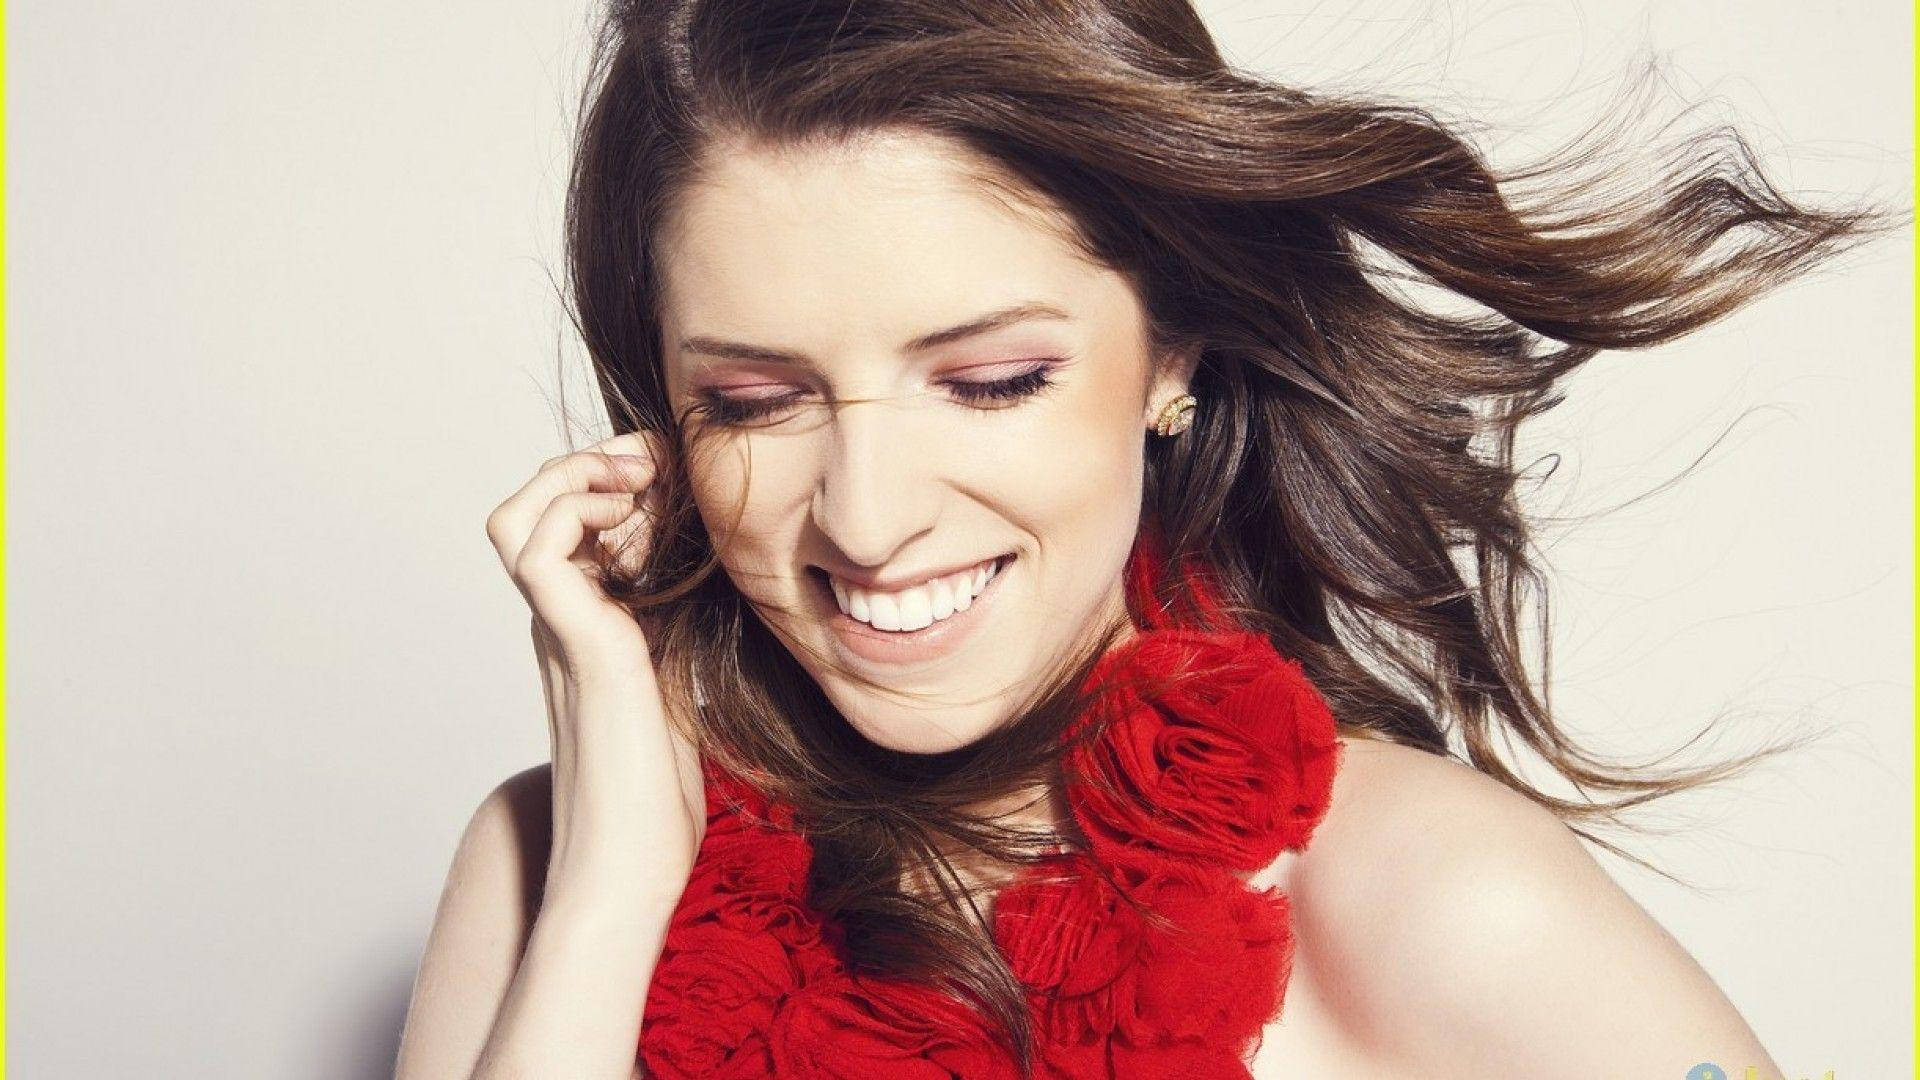 Free Anna Kendrick Wallpaper Downloads, [100+] Anna Kendrick Wallpapers for  FREE 